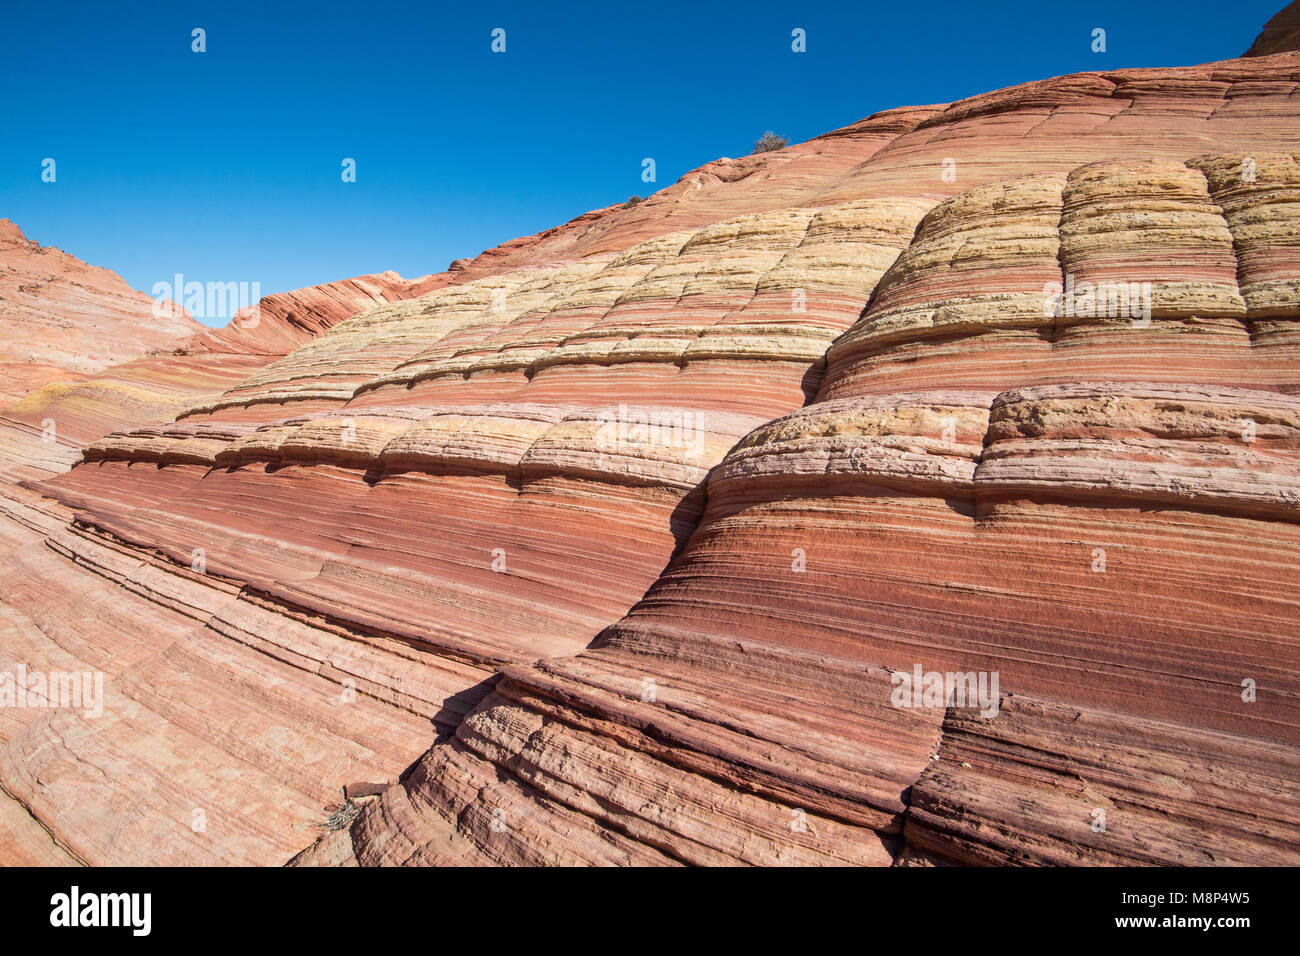 Colorful sandstone cliffs in the Boneyard region of North Coyote Buttes. Stock Photo